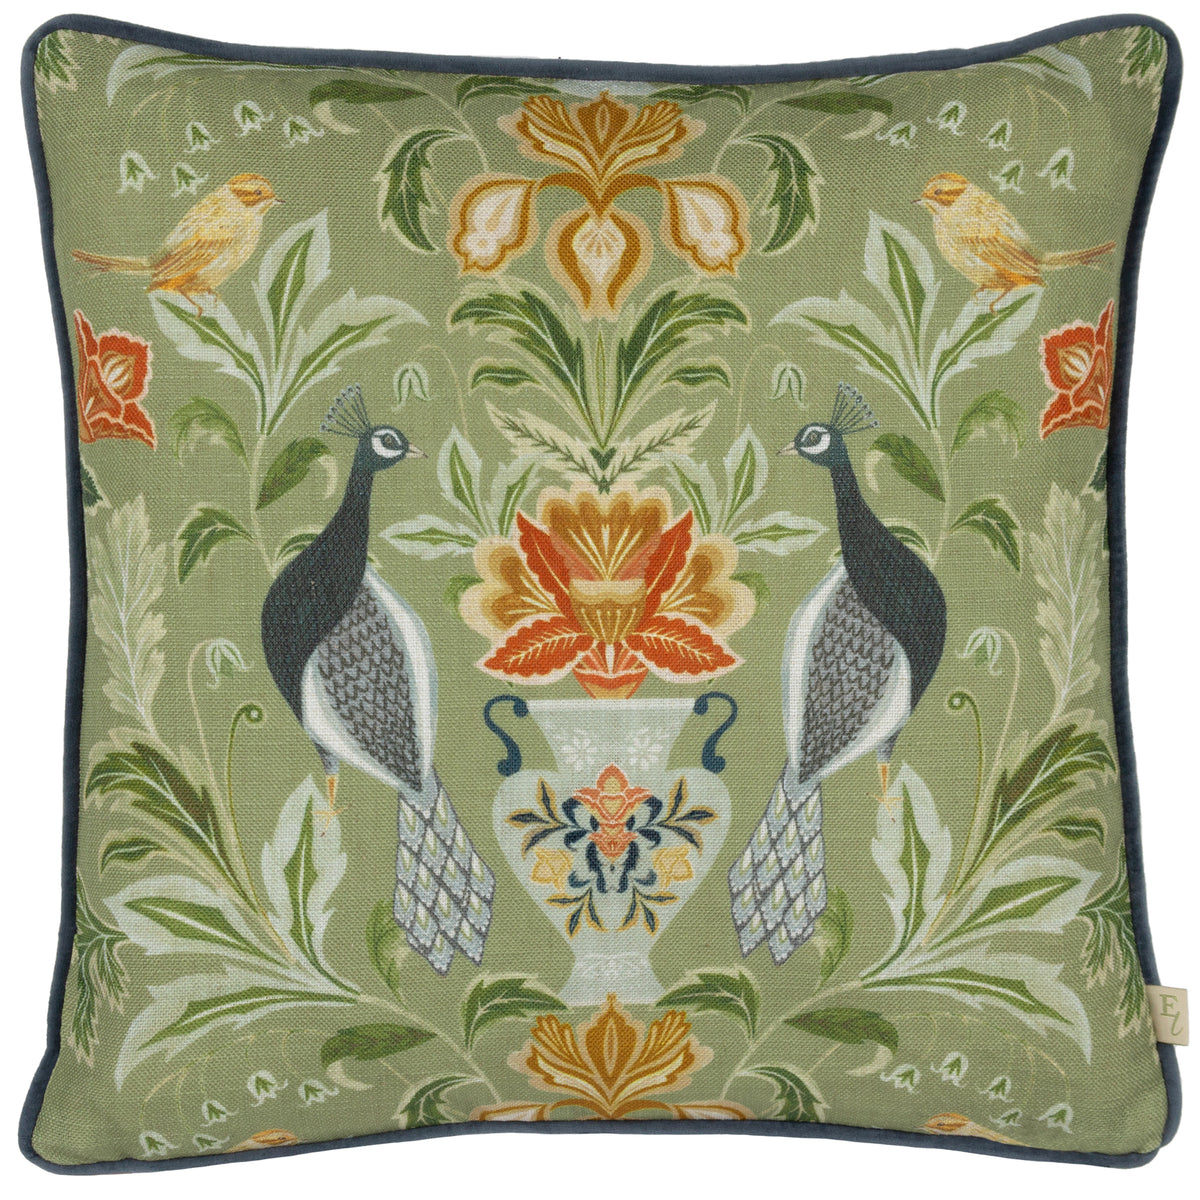 Chatsworth Peacock 43cm Damask Floral Polyester Cushion